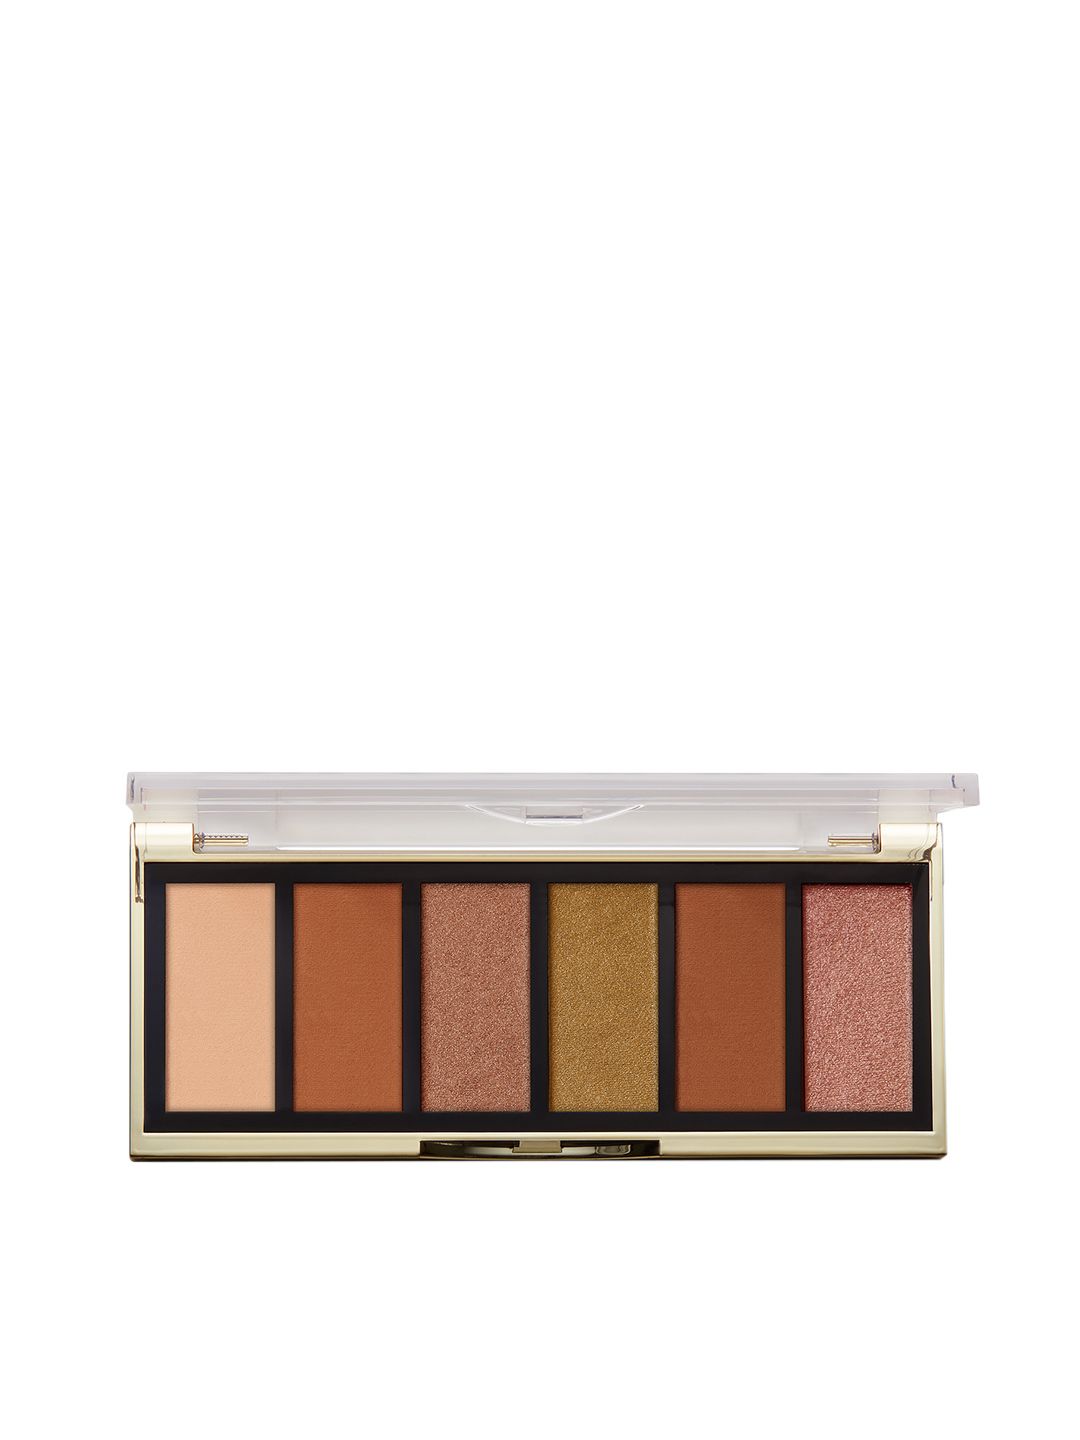 MILANI Most Wanted Eyeshadow Palette - 130 Burning Desire Price in India